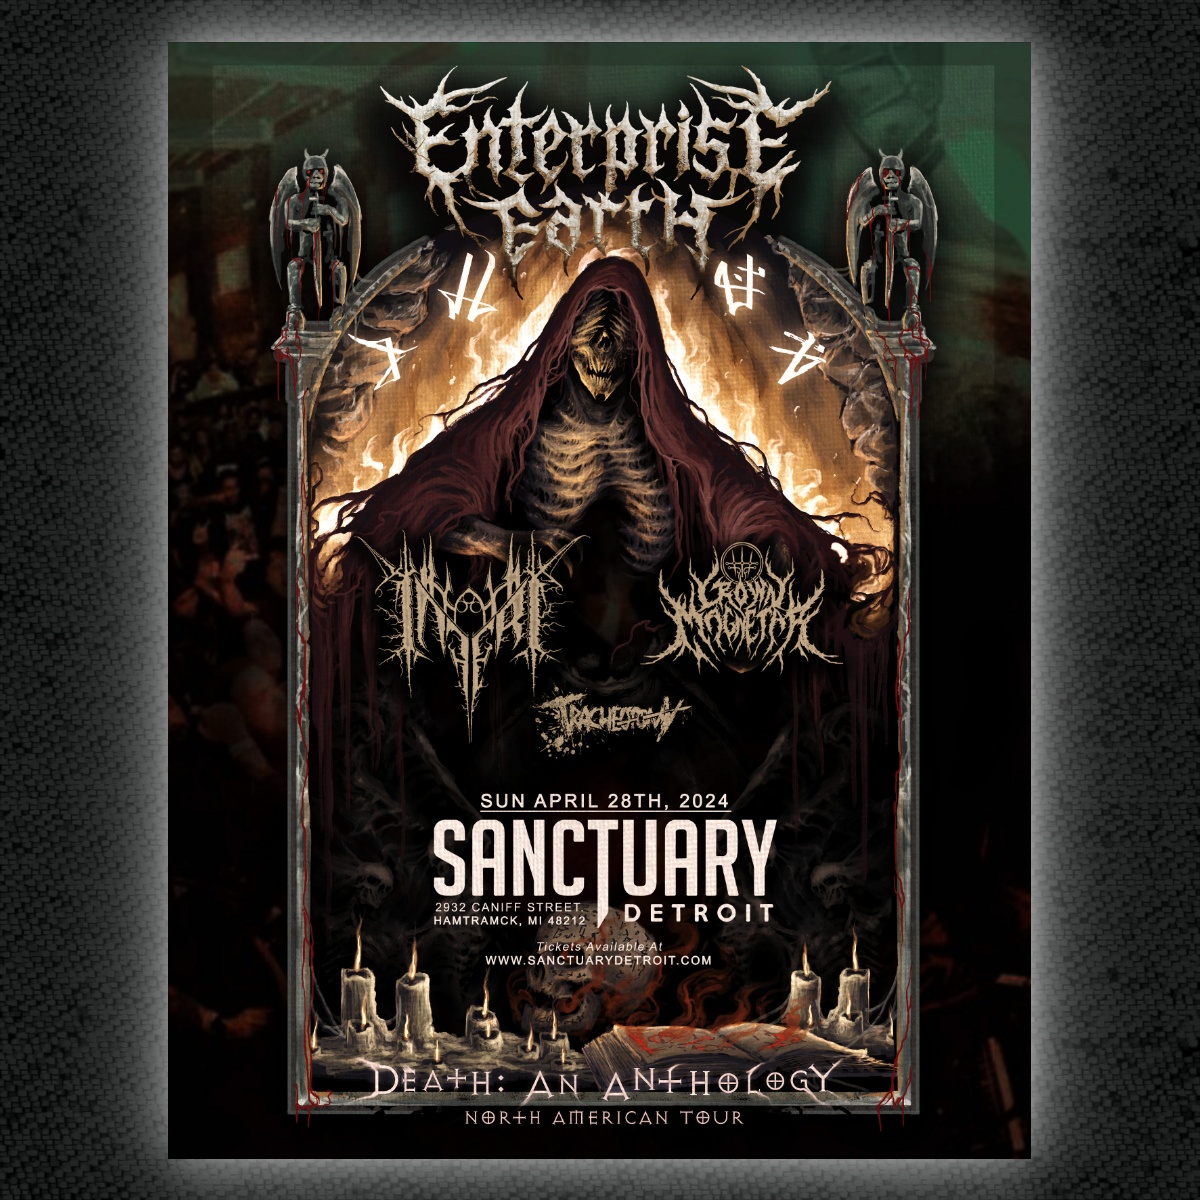 Enterprise Earth returns to The Sanctuary 4/28 with special guests Inferi, Crown Magnetar and Tracheotomy !! Tickets are on sale NOW at sanctuarydetroit.com